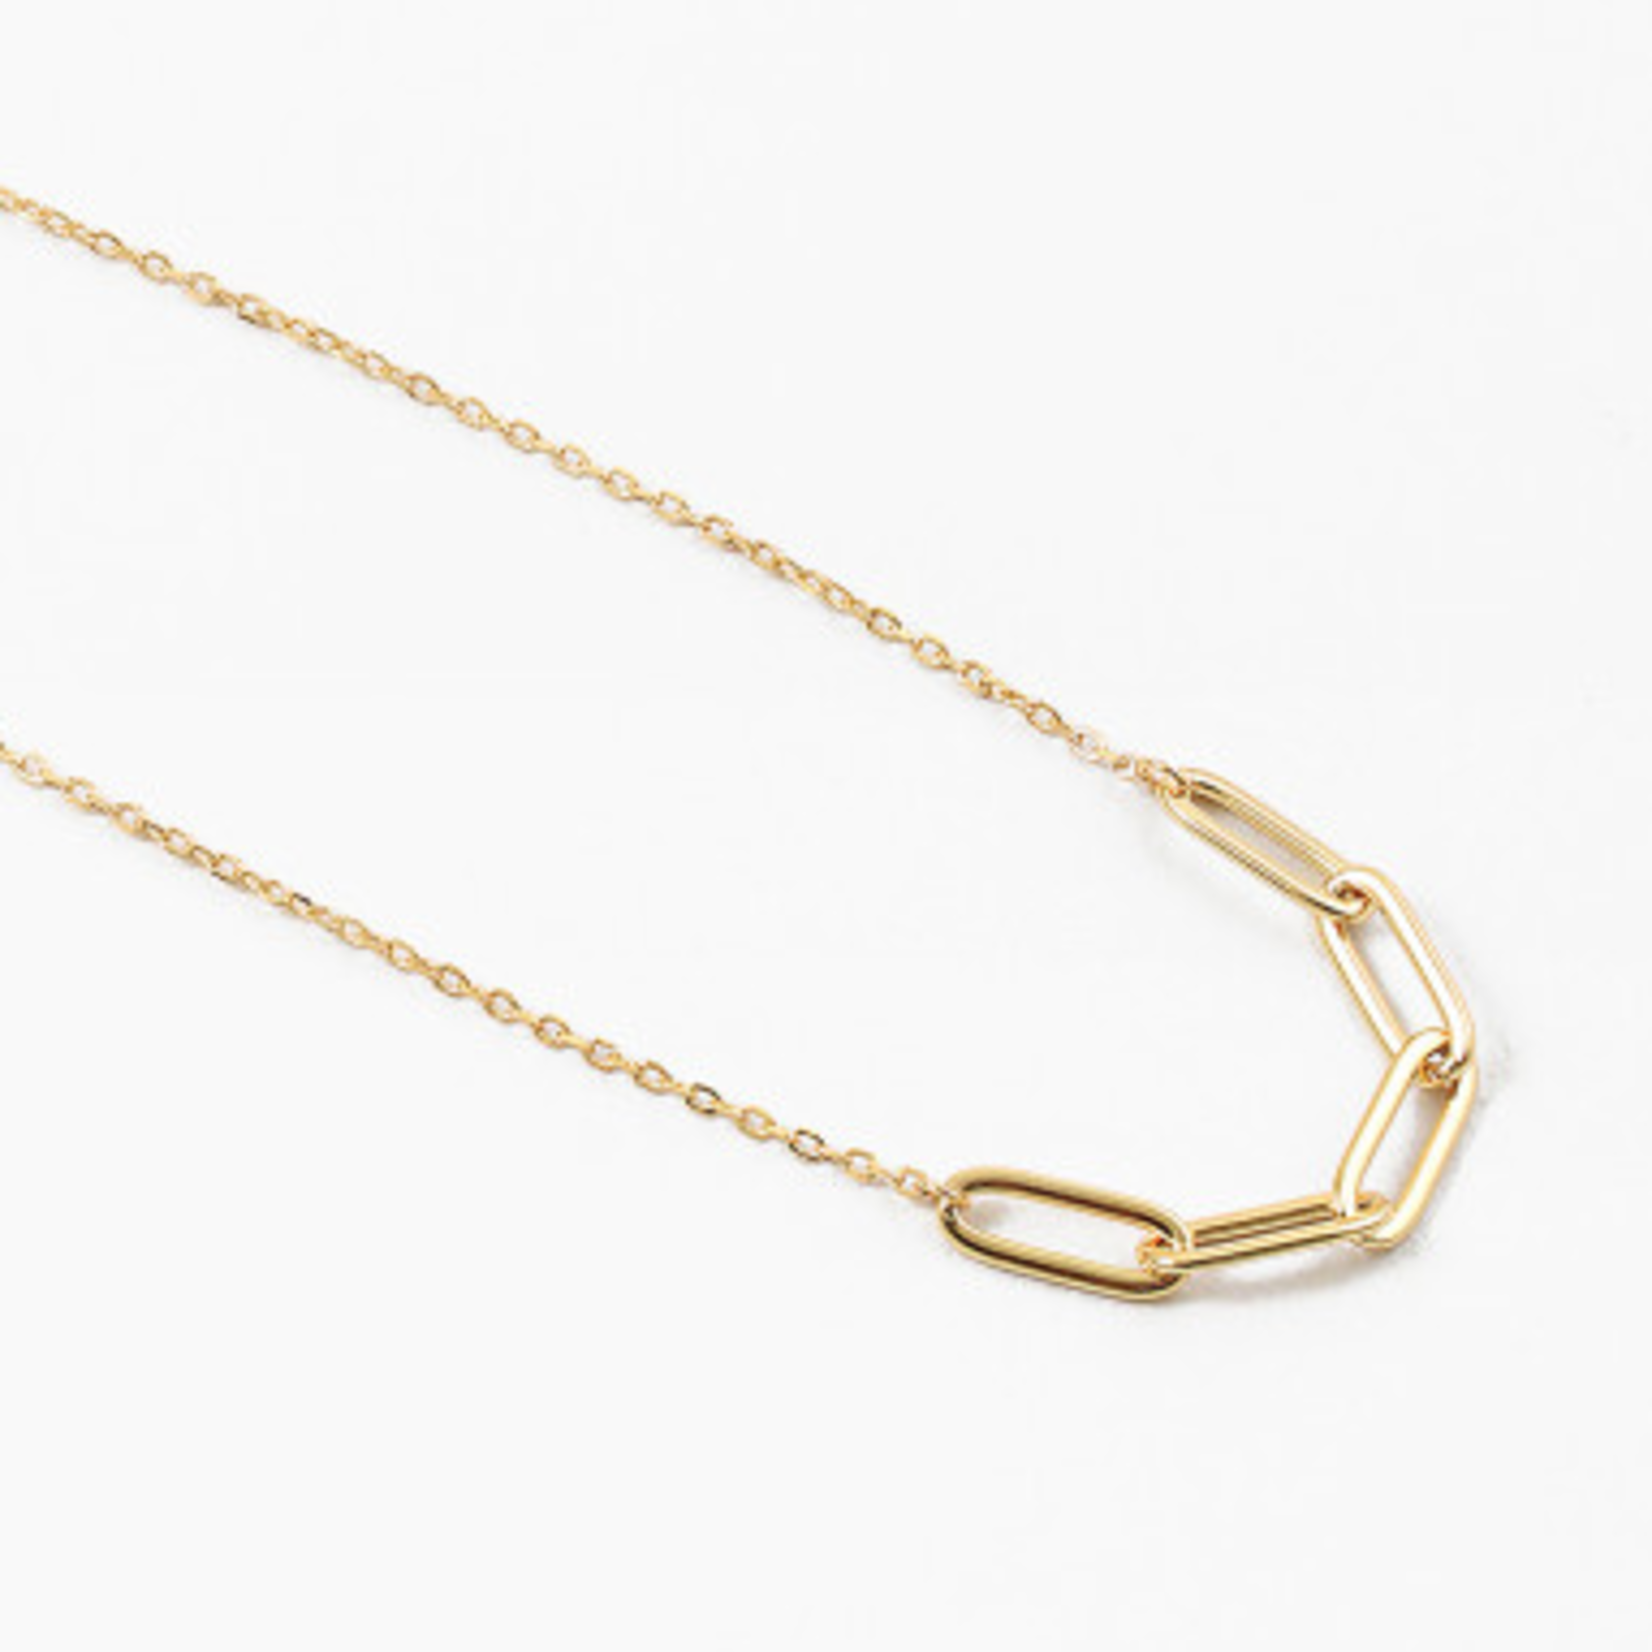 Gold SS Necklace w/ Statement Chain Links